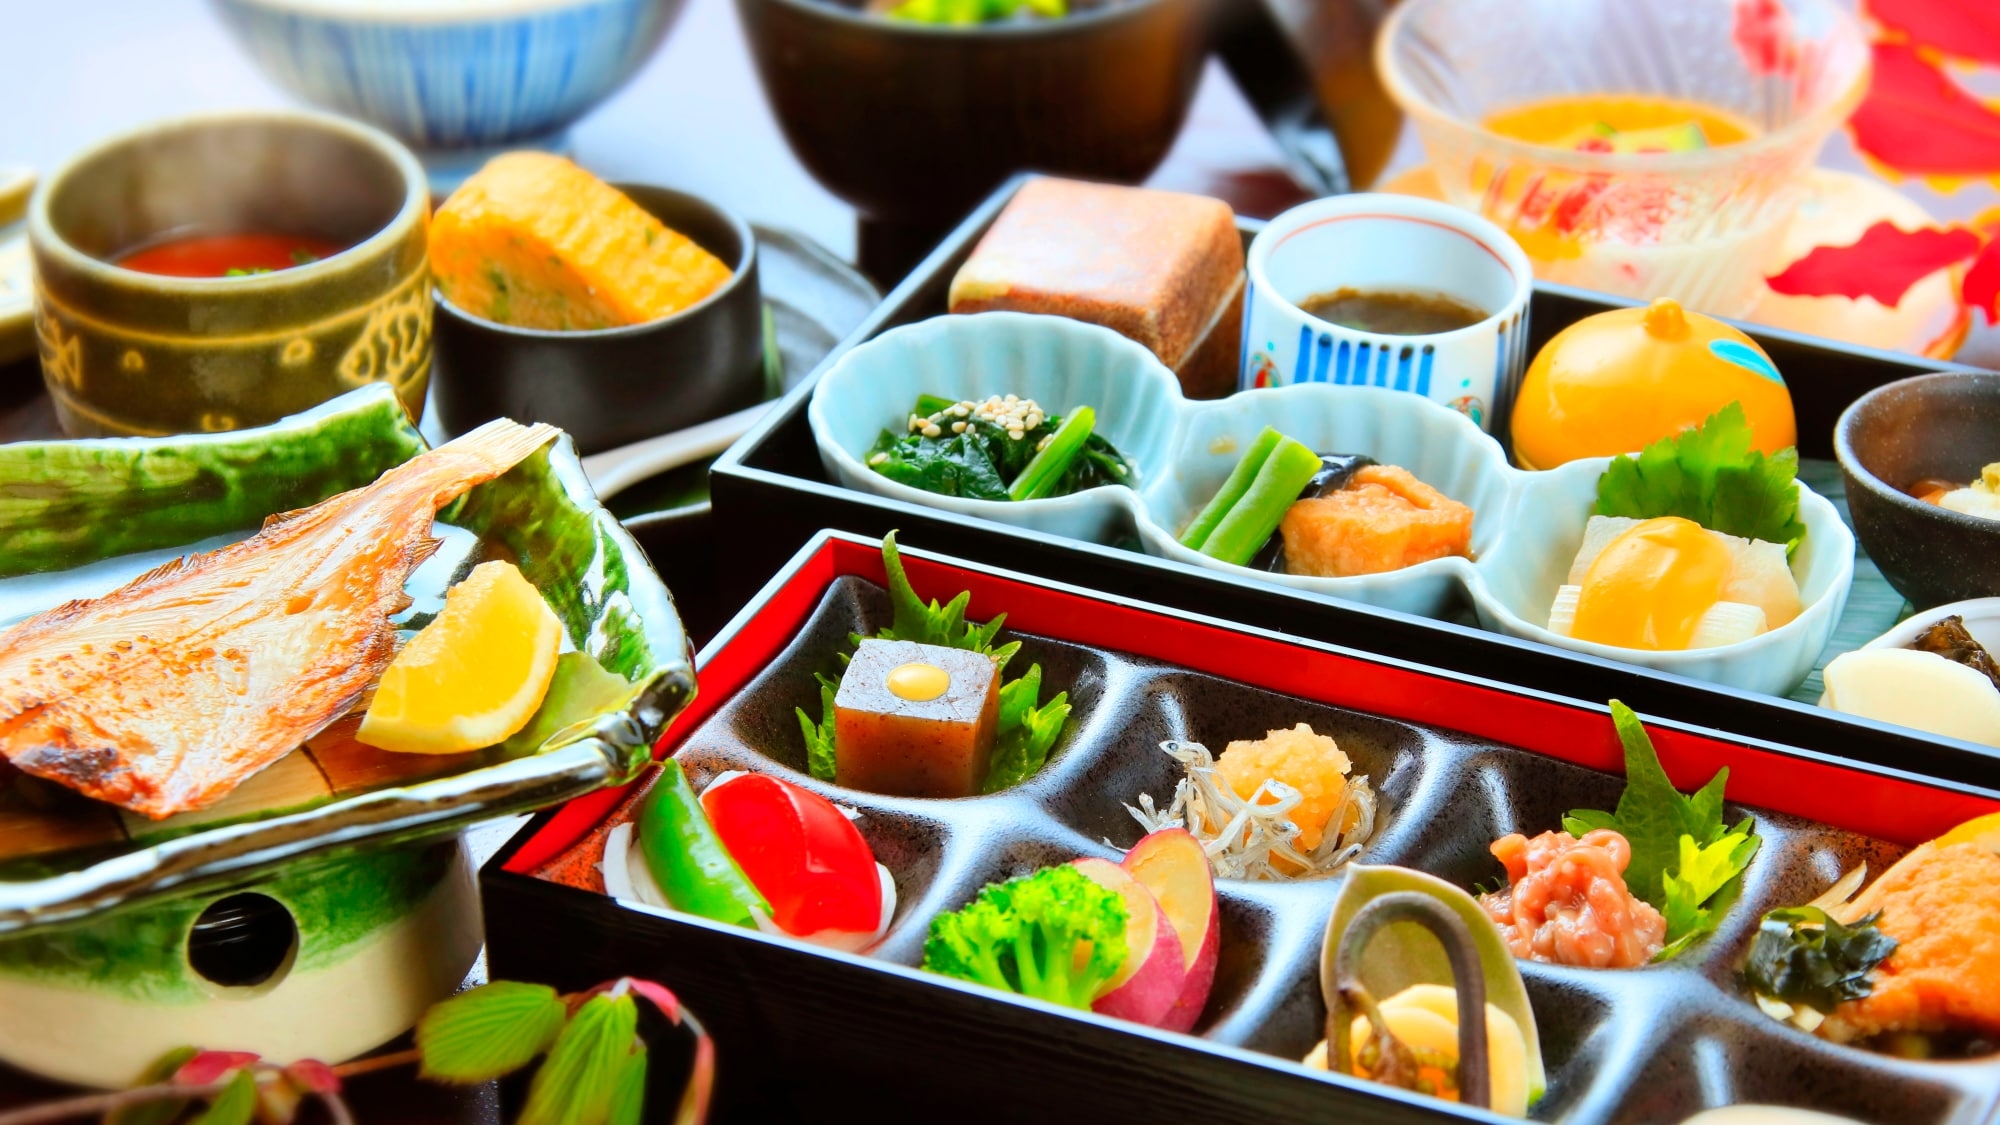 A breakfast full of the blessings of the Sanin region, filled with the commitment of Yururi.